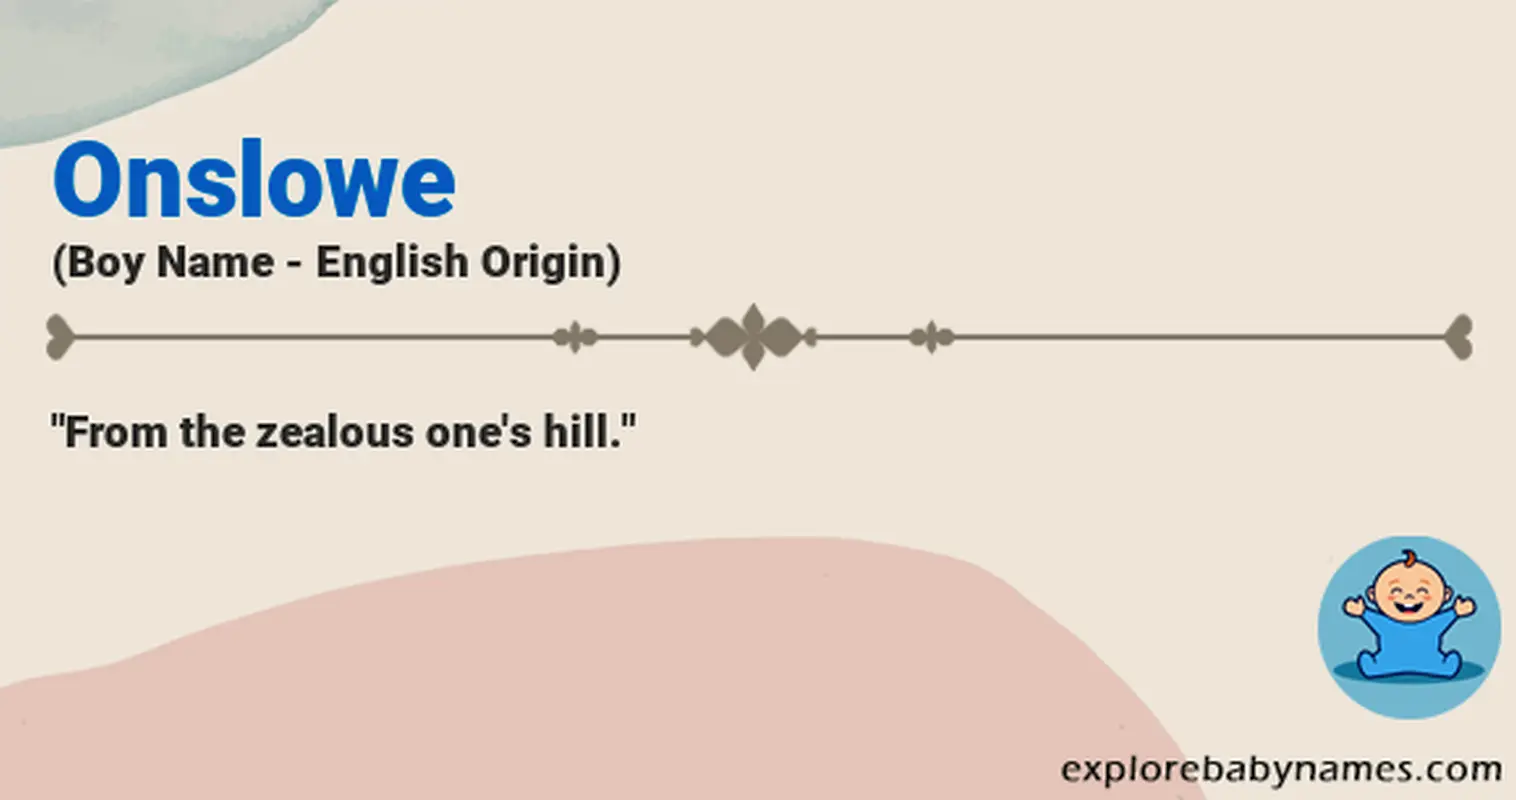 Meaning of Onslowe